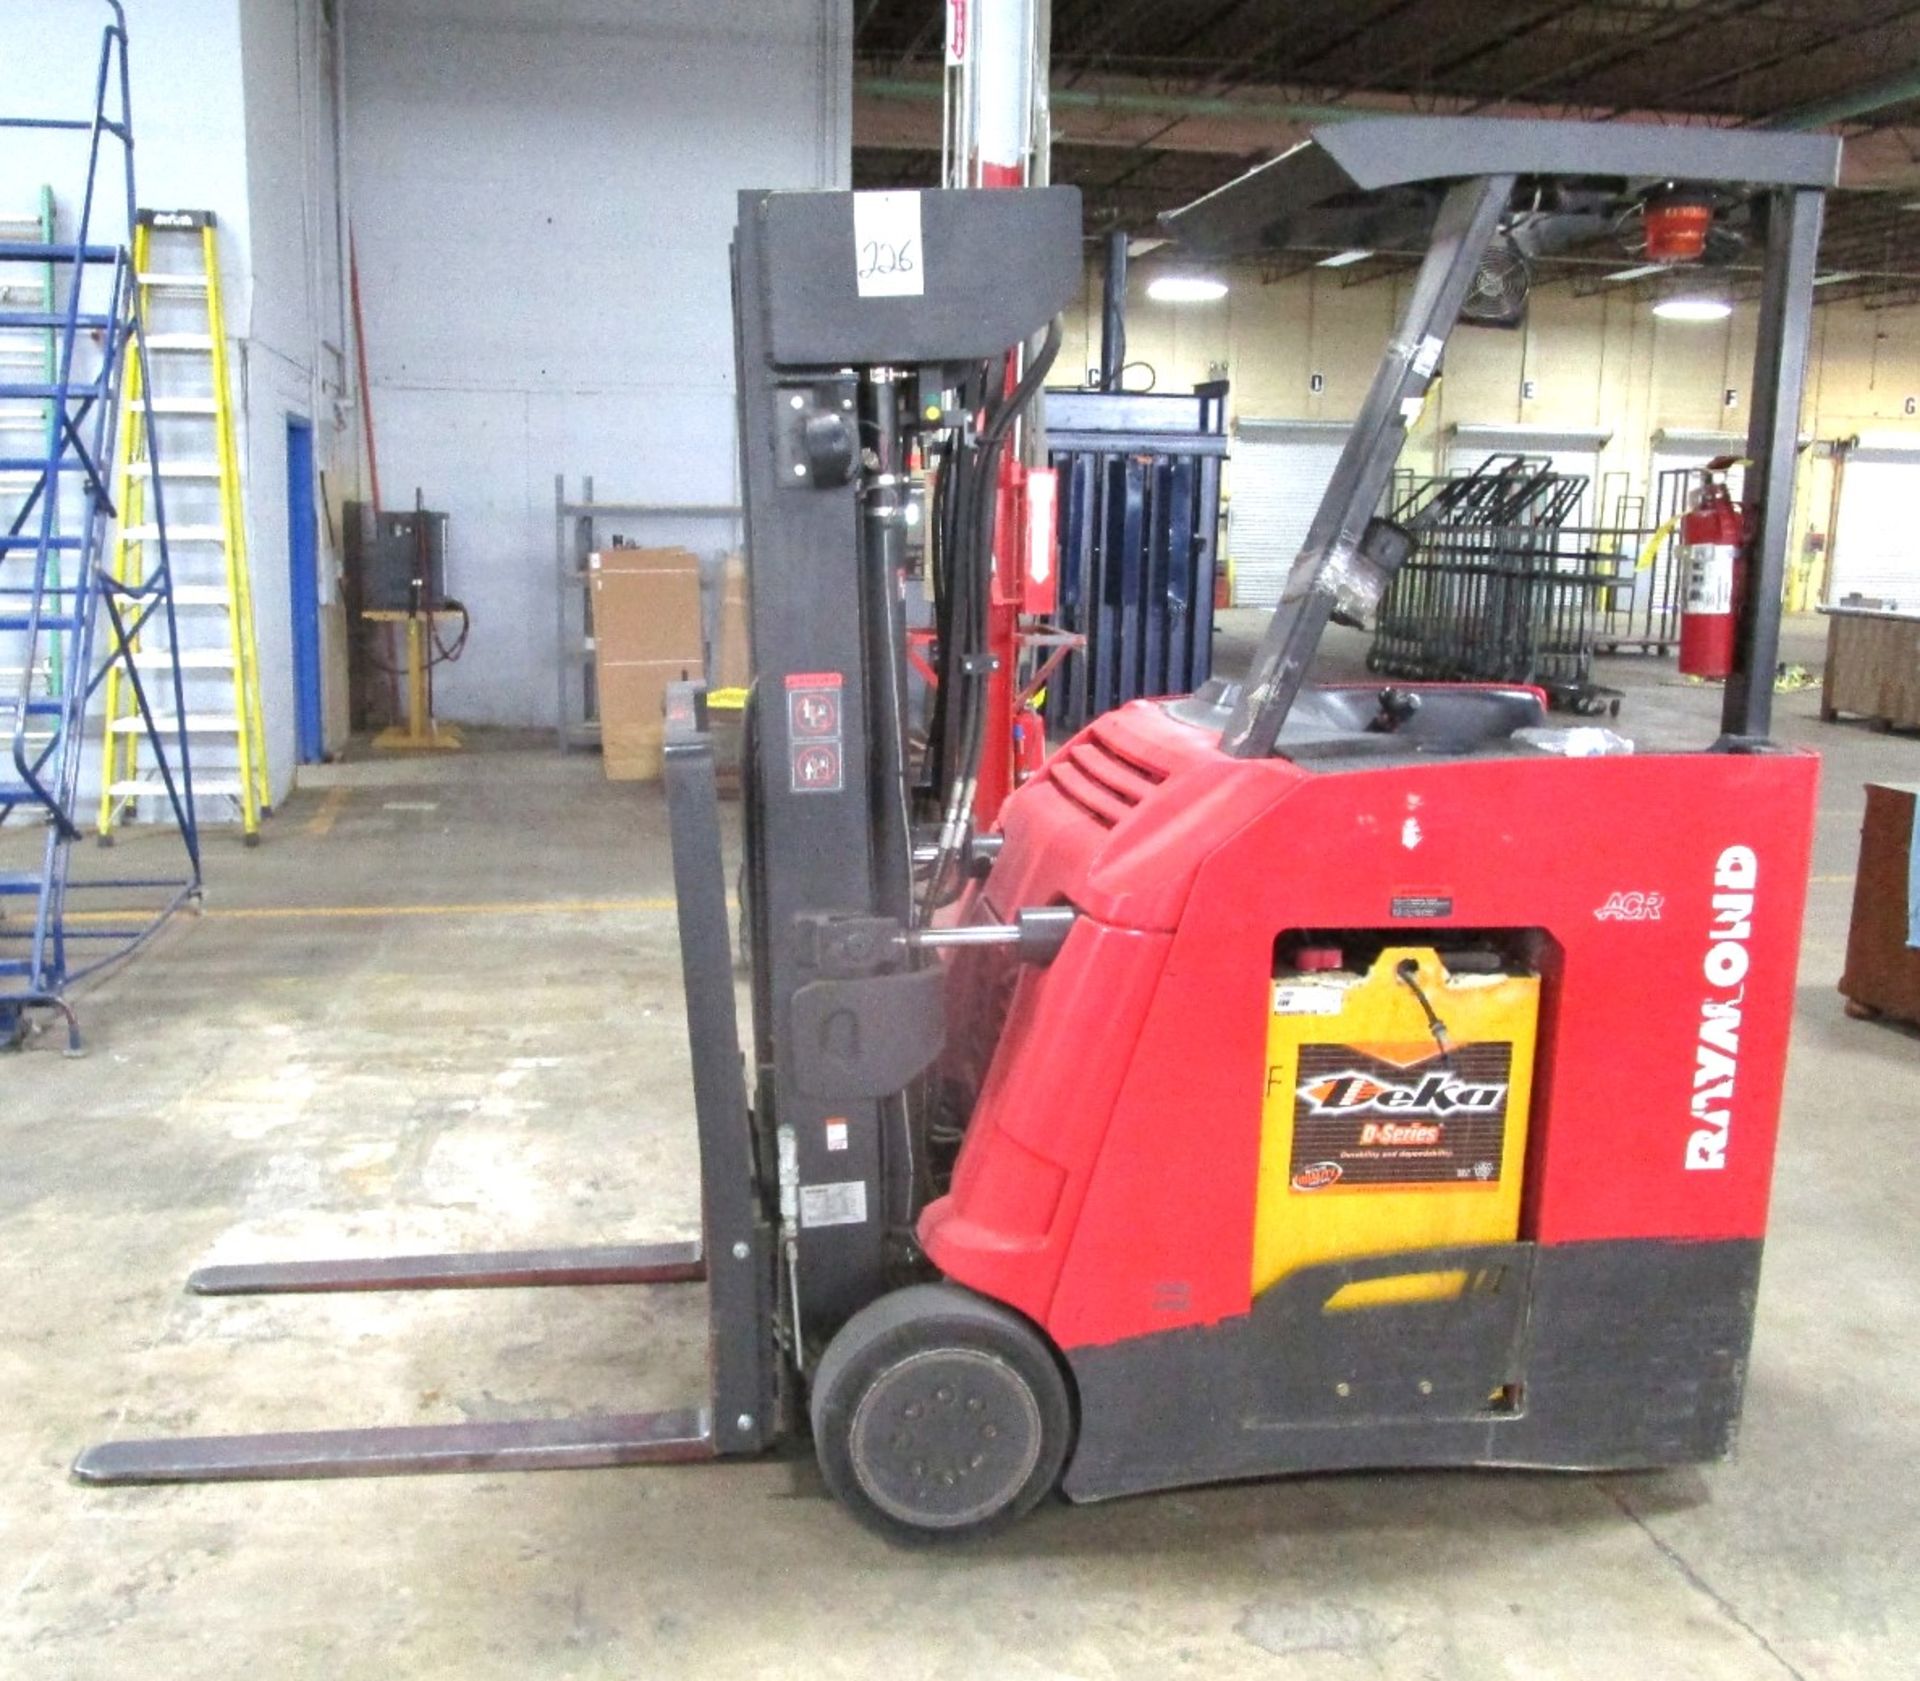 Raymond 425-C35QM 3,500-Lb Electric Stand Up Forklift Truck